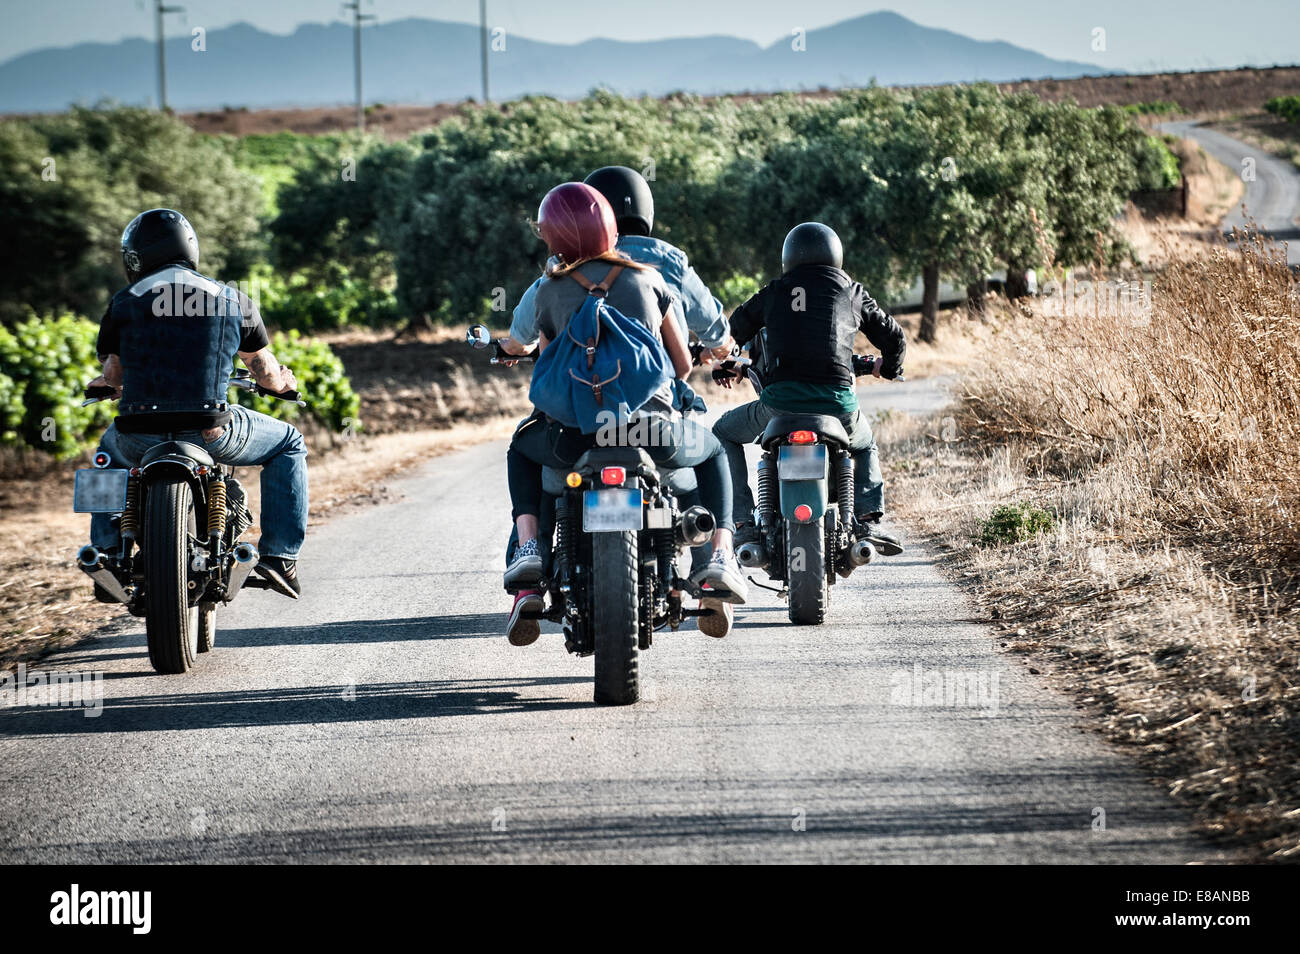 Rear view of four friends motorcycling on rural road, Cagliari, Sardinia, Italy Stock Photo